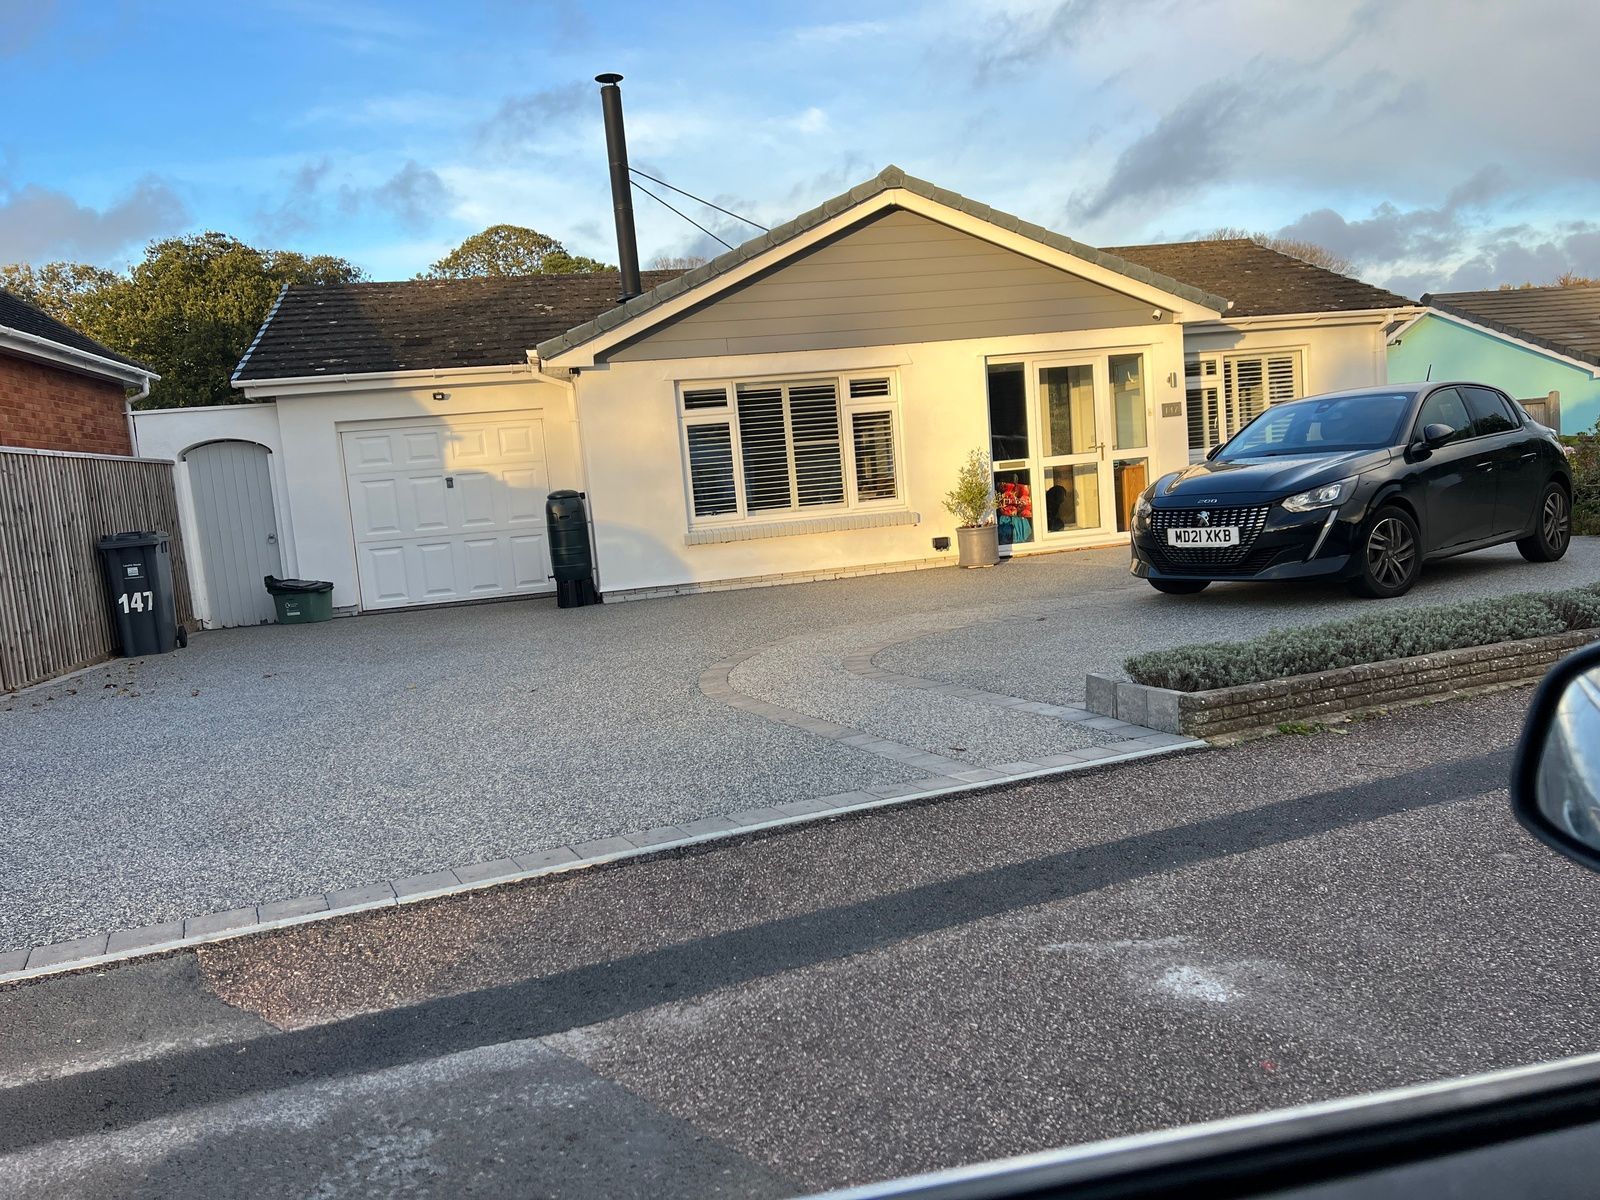 Grey resin driveway outside a white bungalow. There is a black car parked on the right-hand side